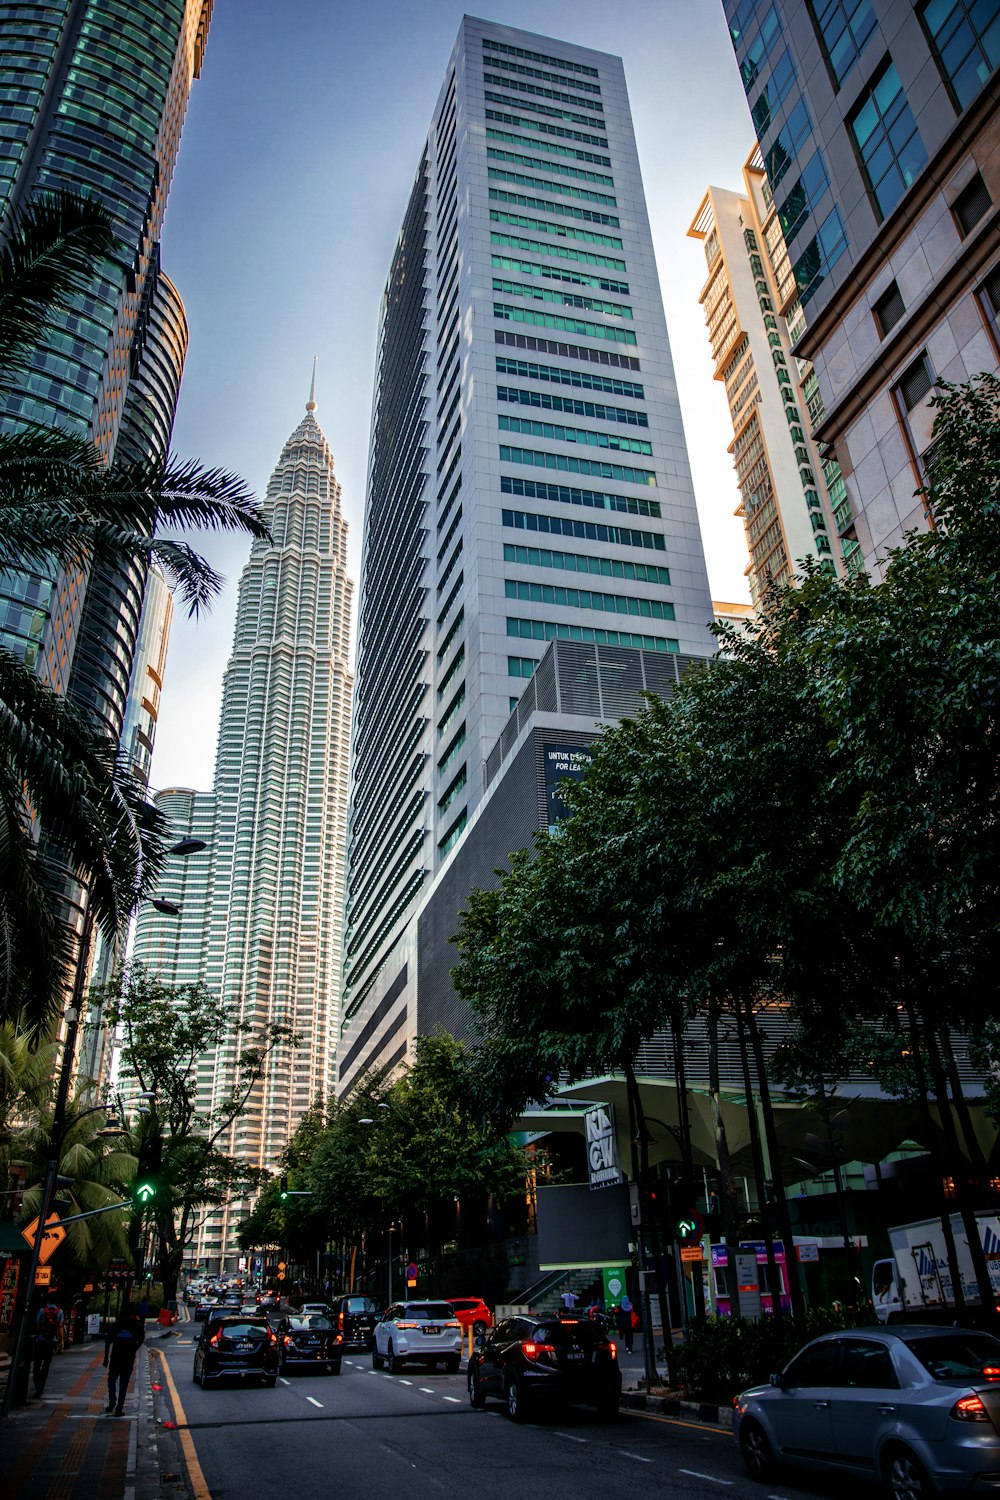 a street with cars and tall buildings